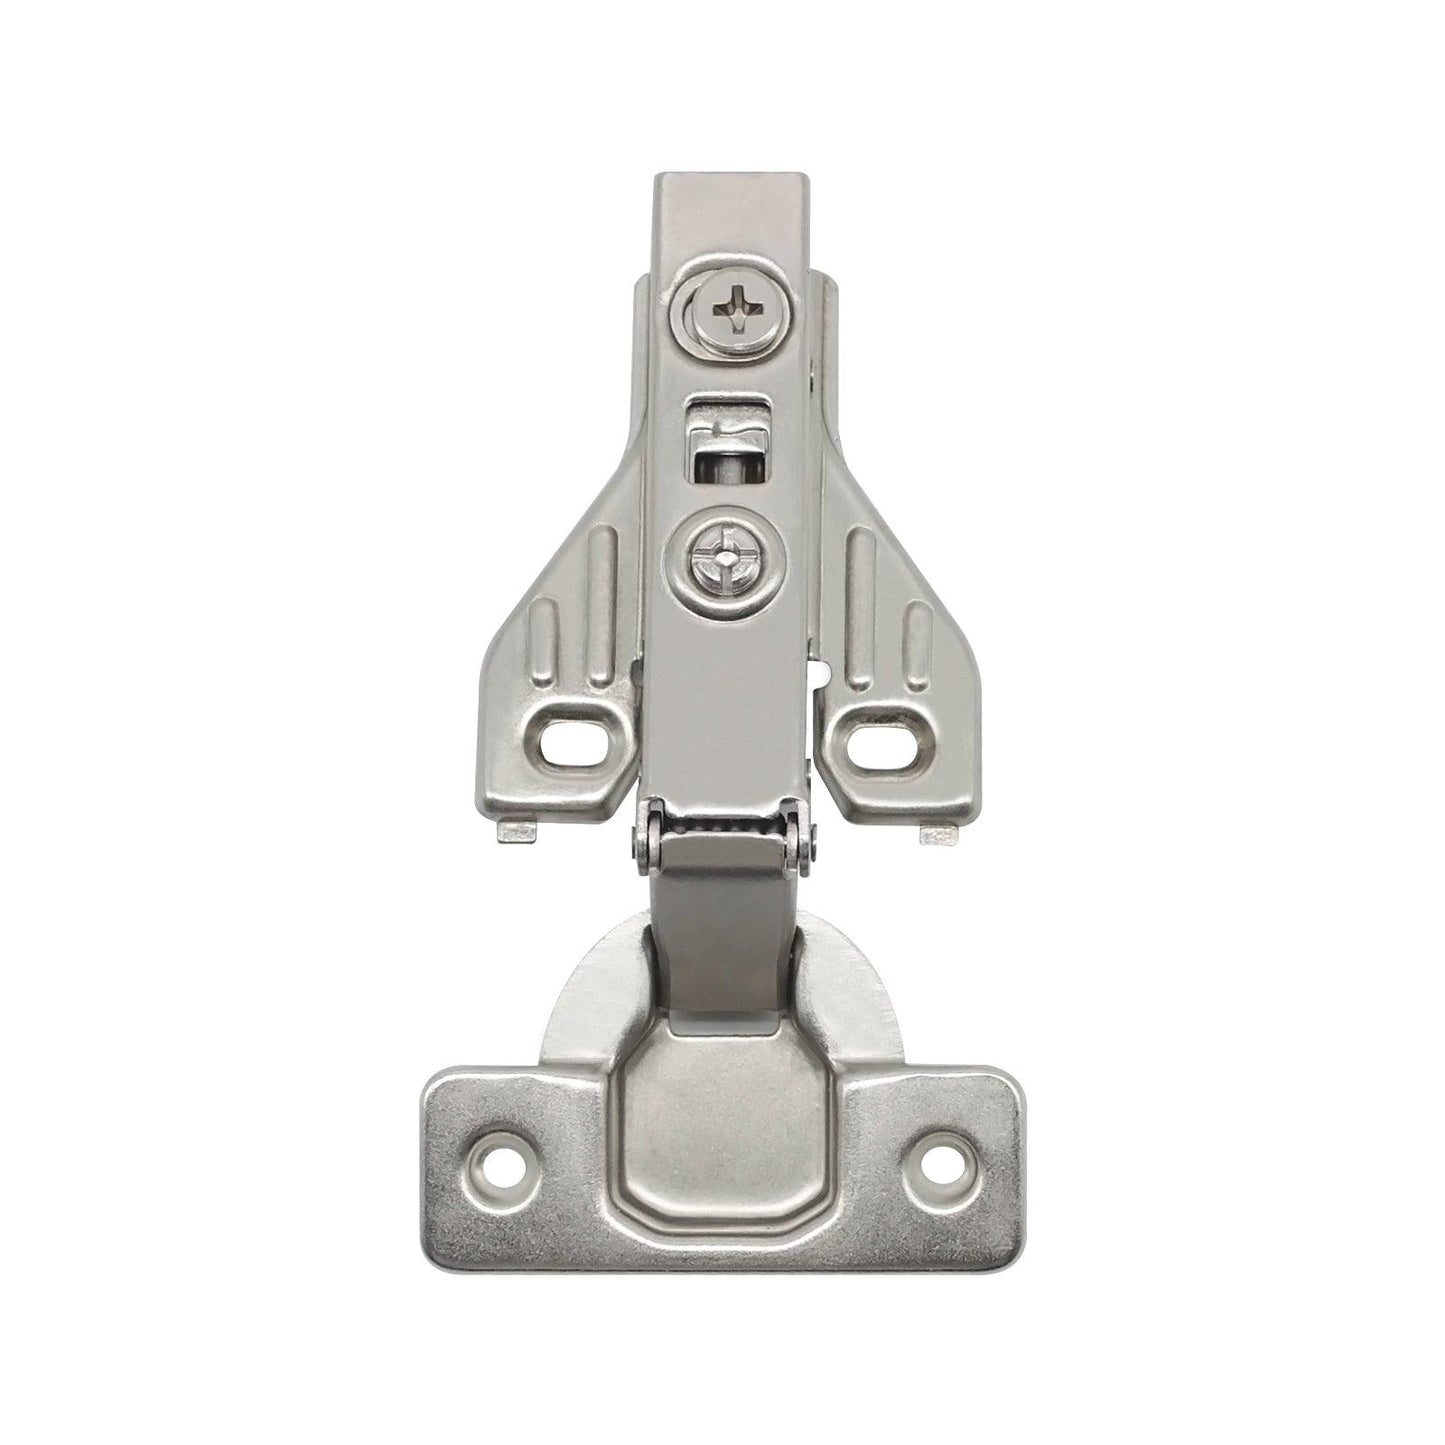 Full Overlay Concealed Hinges For Cabinet with Frame, Soft Close Cabinet Hinges CHRH04HA - Probrico